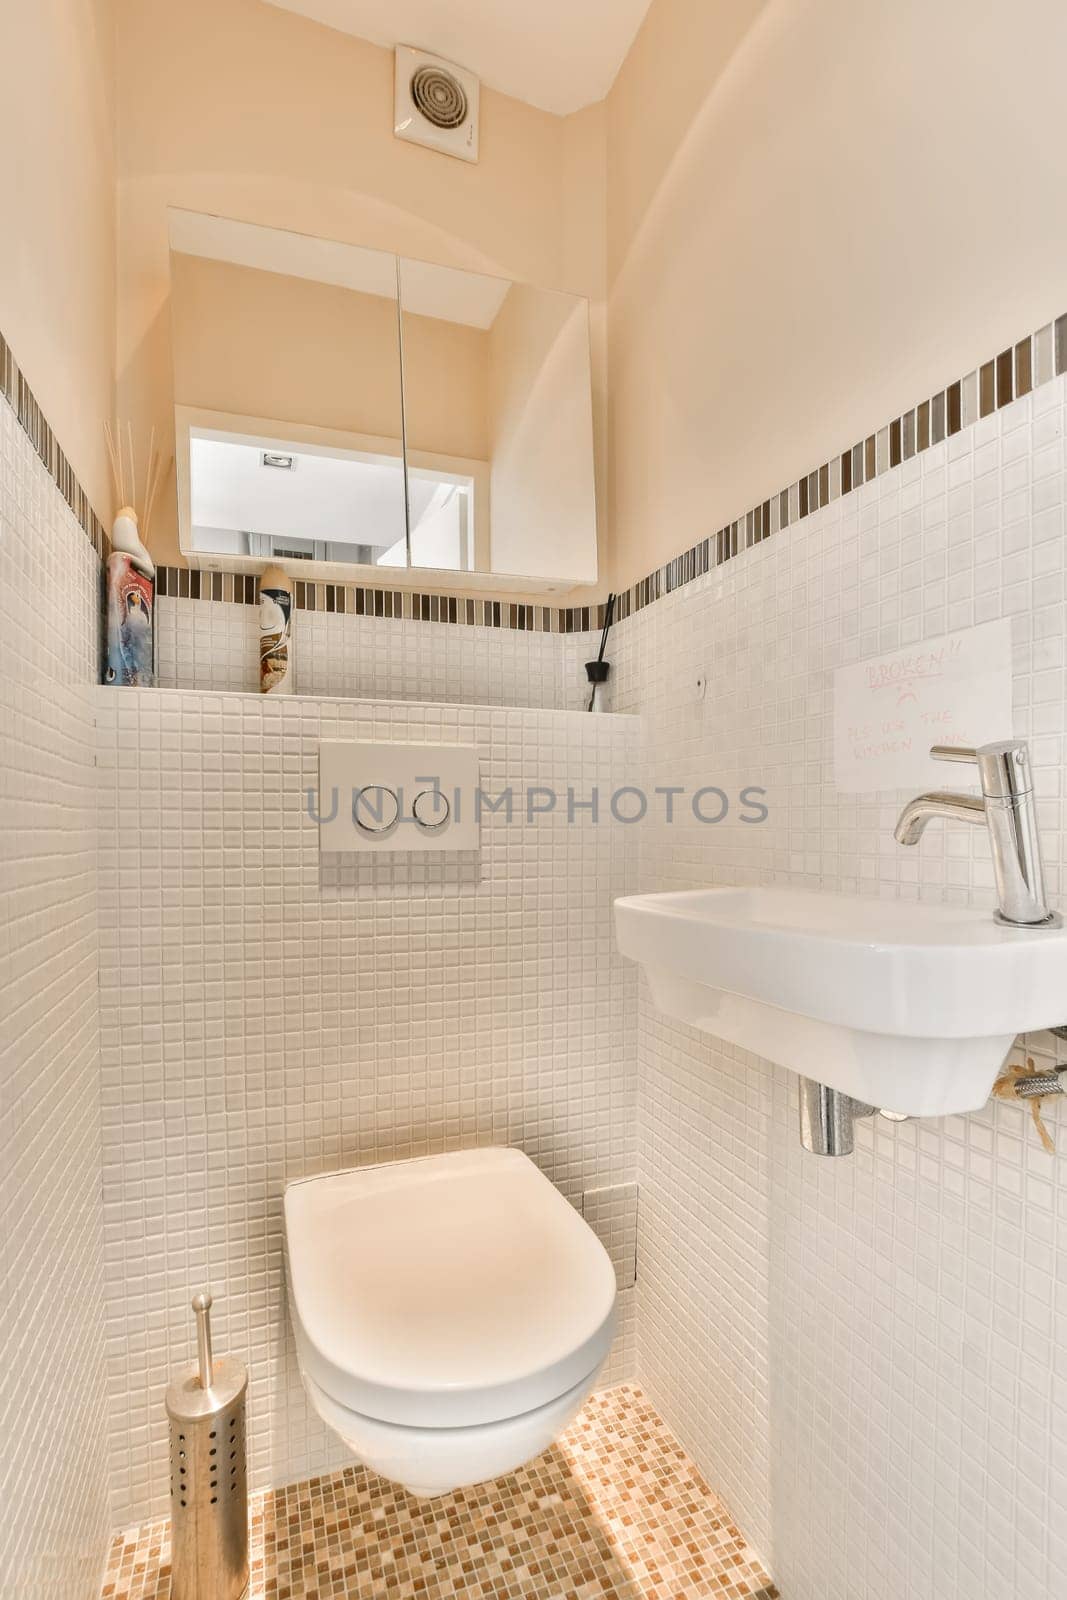 a white toilet in a small bathroom with tiled floor and wall tiles on the walls there is a mirror above it